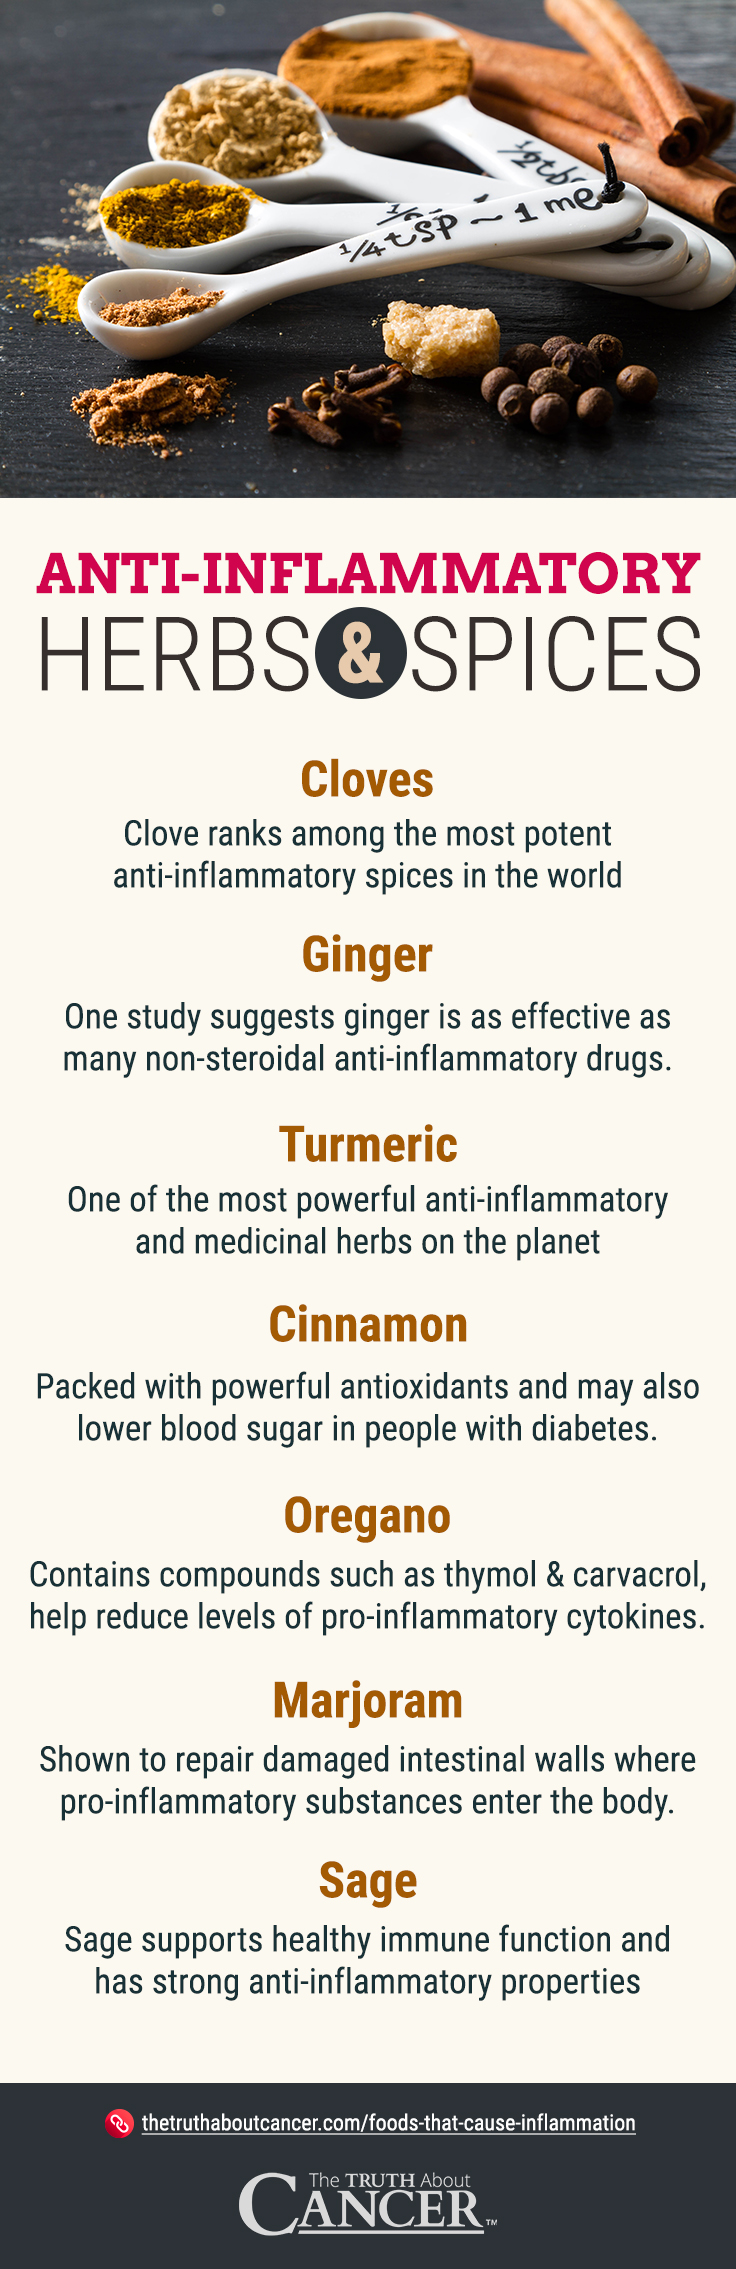 Anti-Inflammatory Spices - Infographic